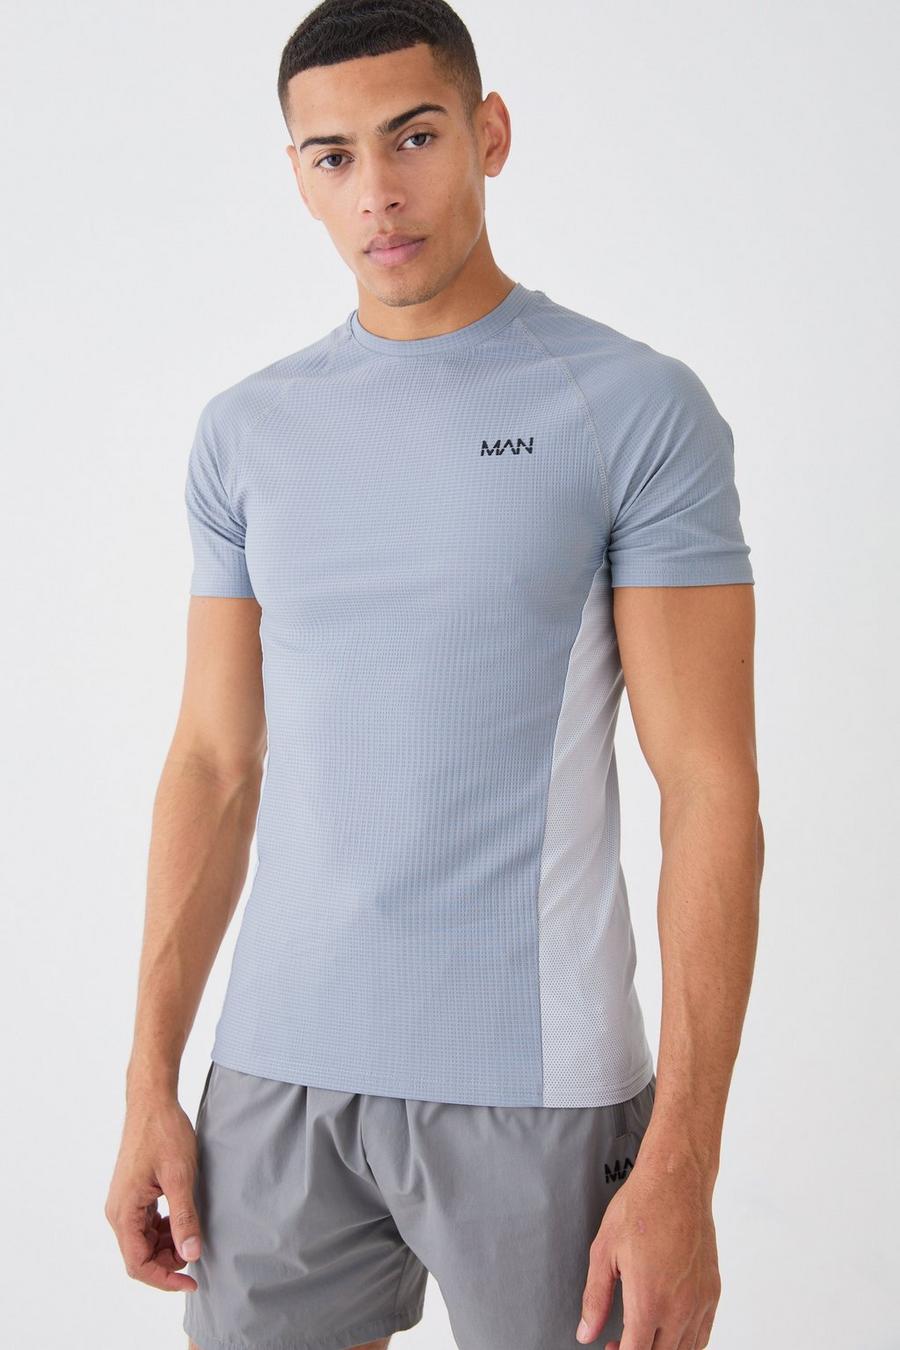 Man Active Muscle Fit Colorblock T-Shirt, Charcoal image number 1